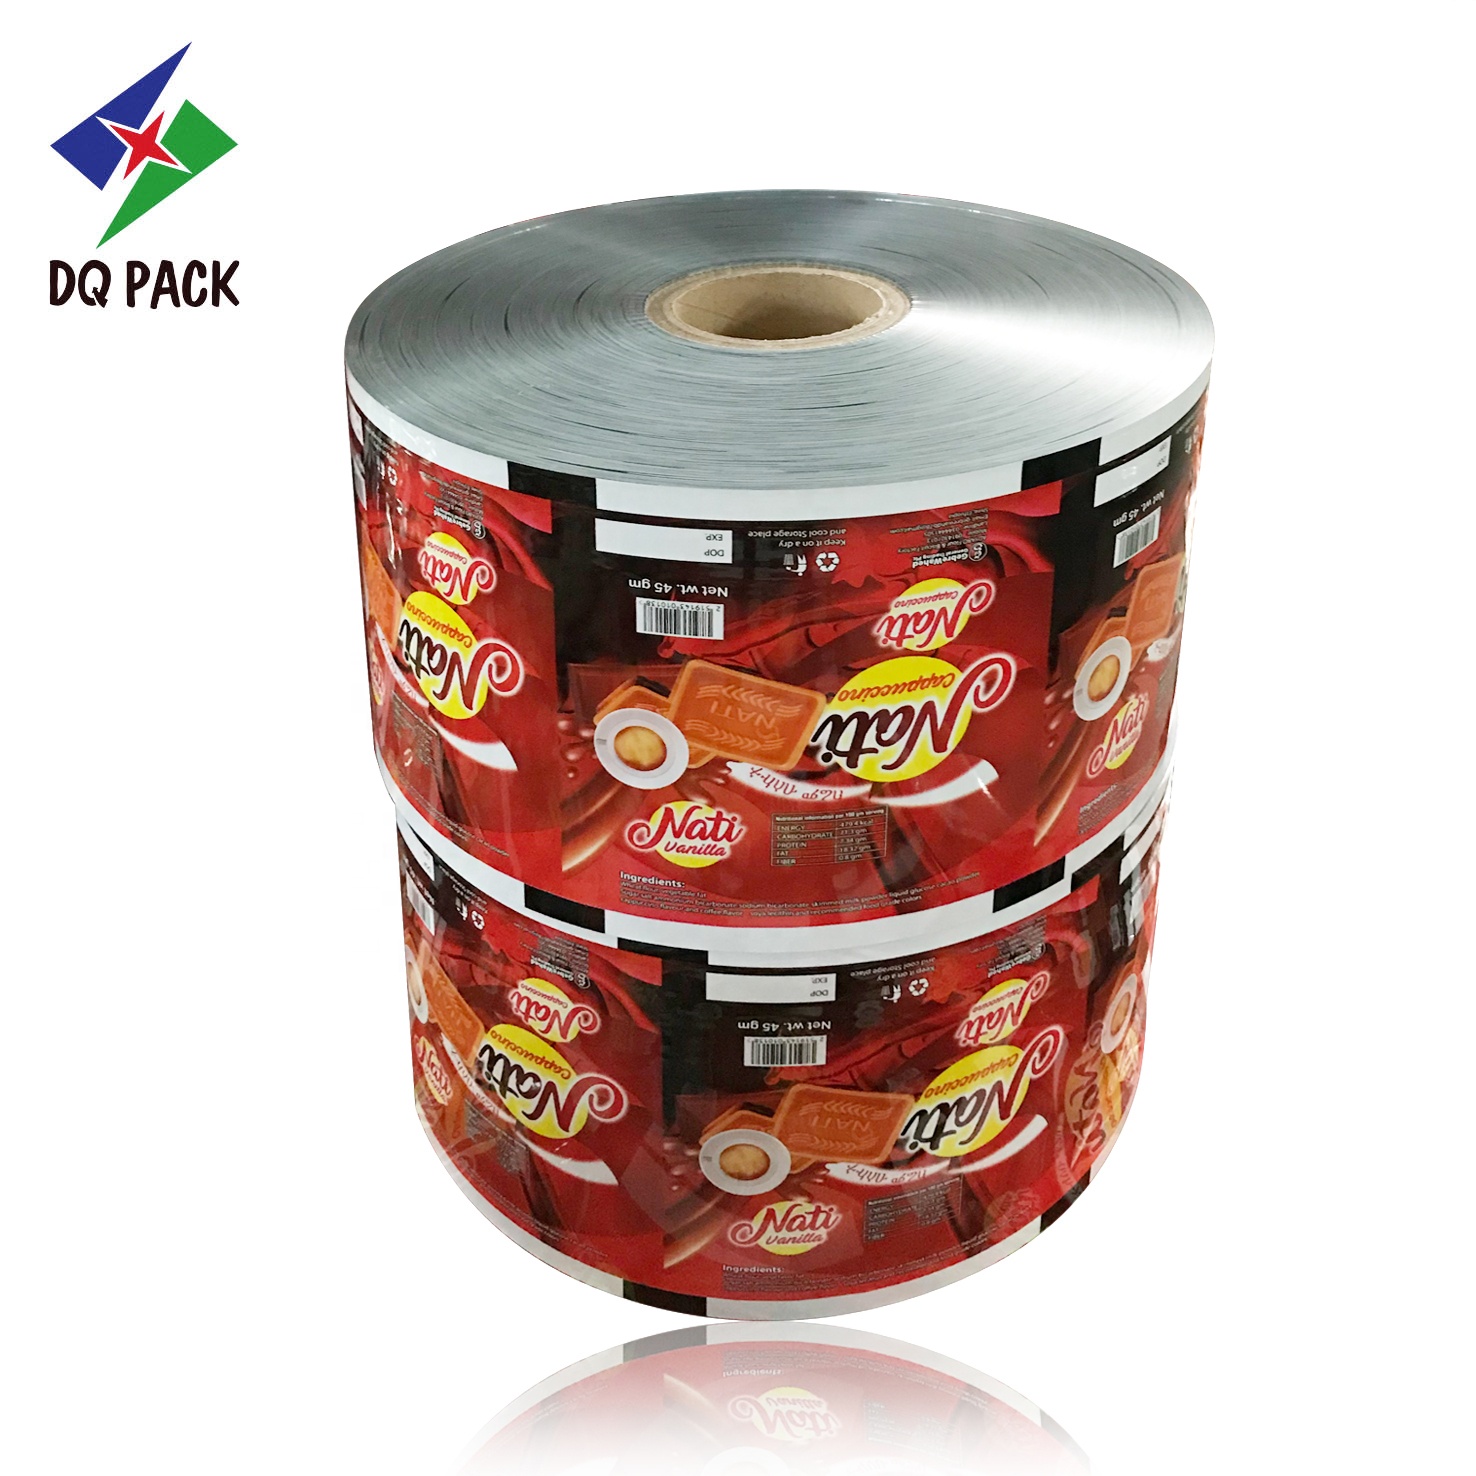 DQ PACK Customized Printing Flexible Packaging Aluminium Roll Film For Food Pack Stock